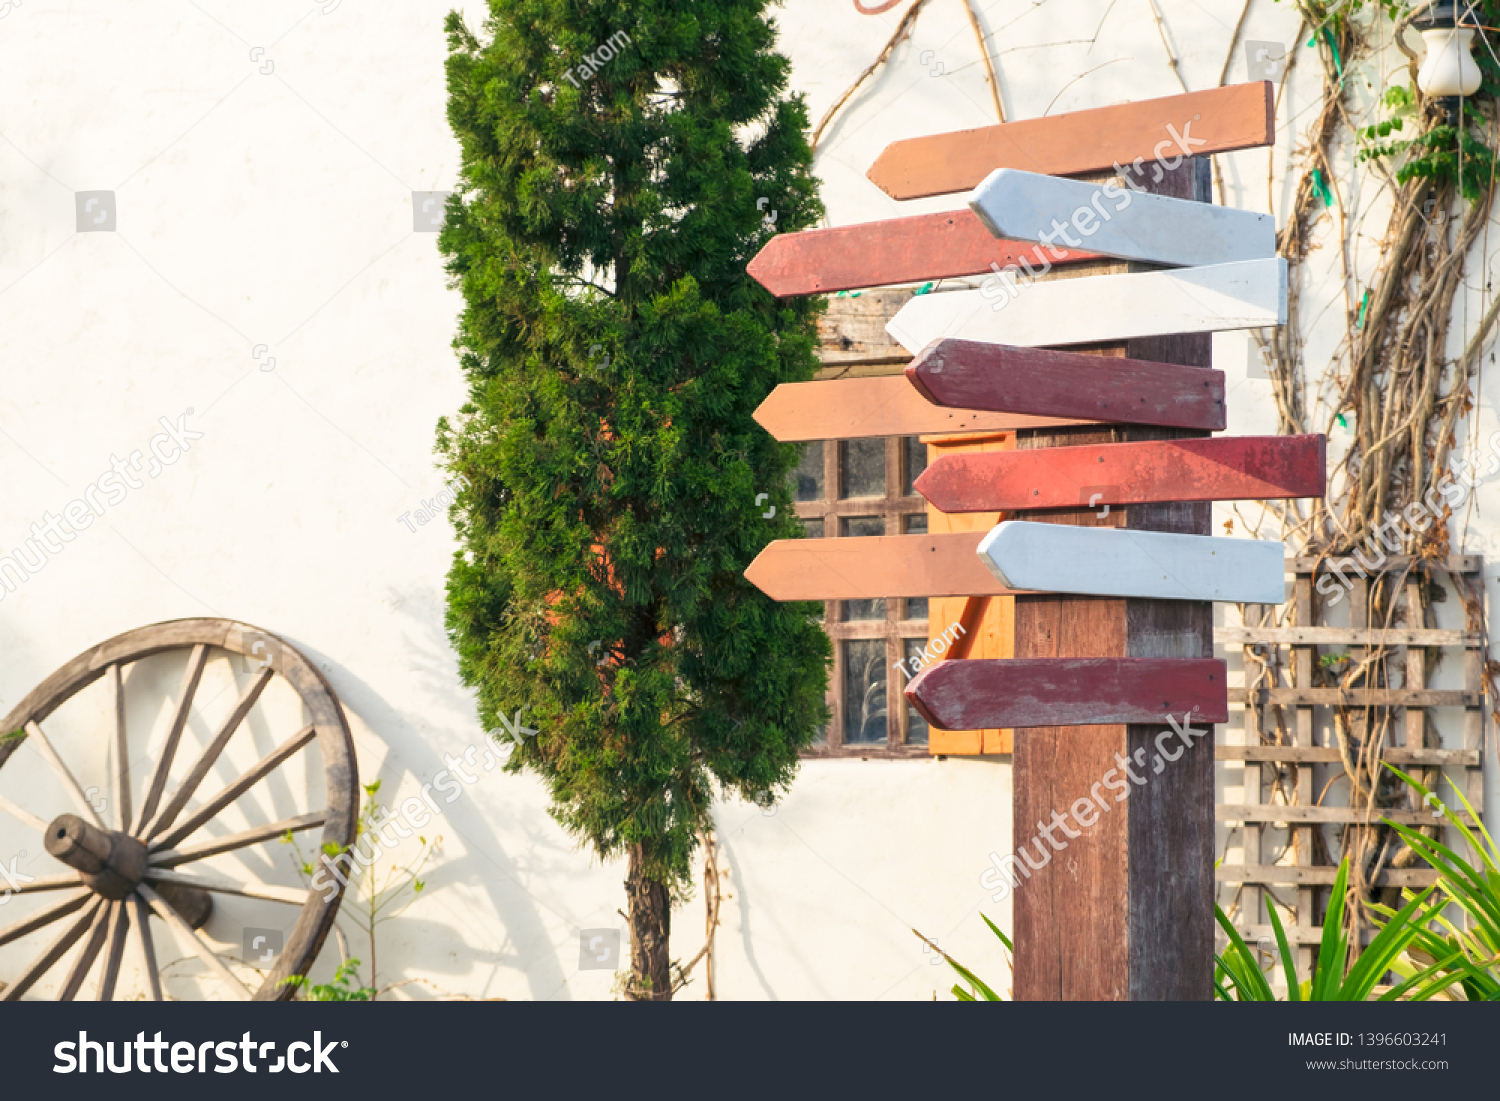 Wood direction sign, empty boards pointing towards different directions - image #1396603241